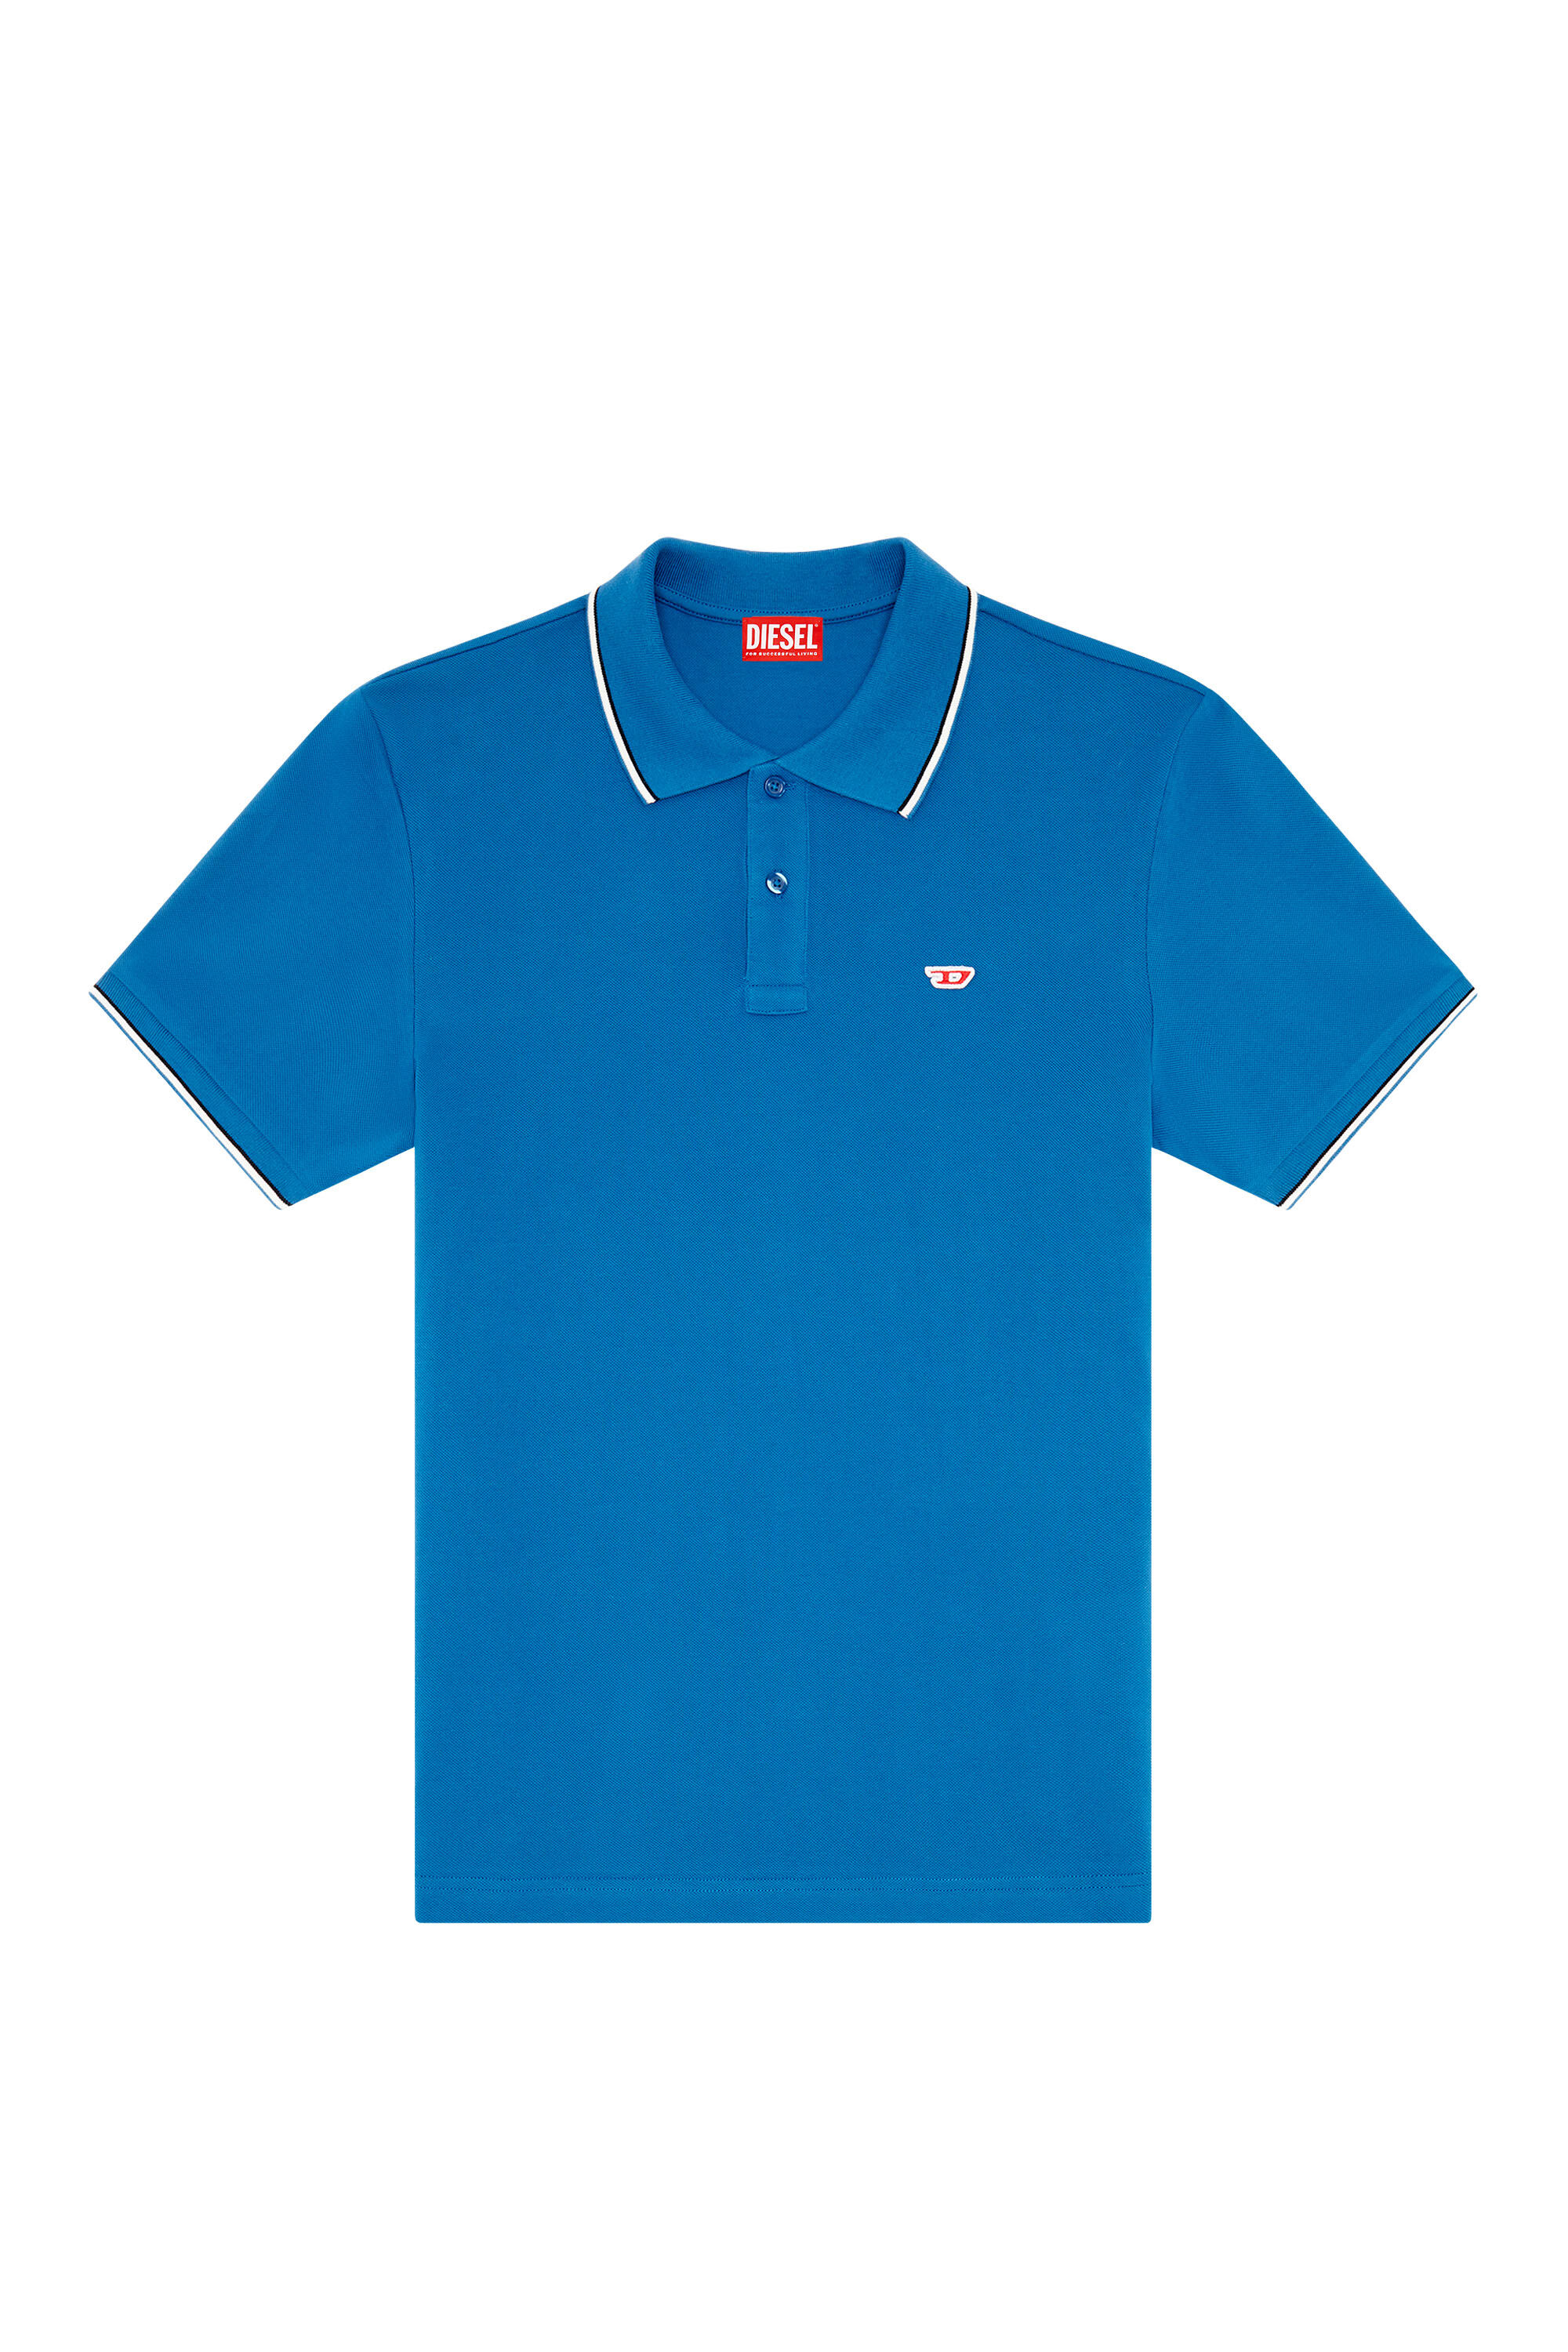 Diesel - T-SMITH-D, Man Polo shirt with striped trims in Blue - Image 2